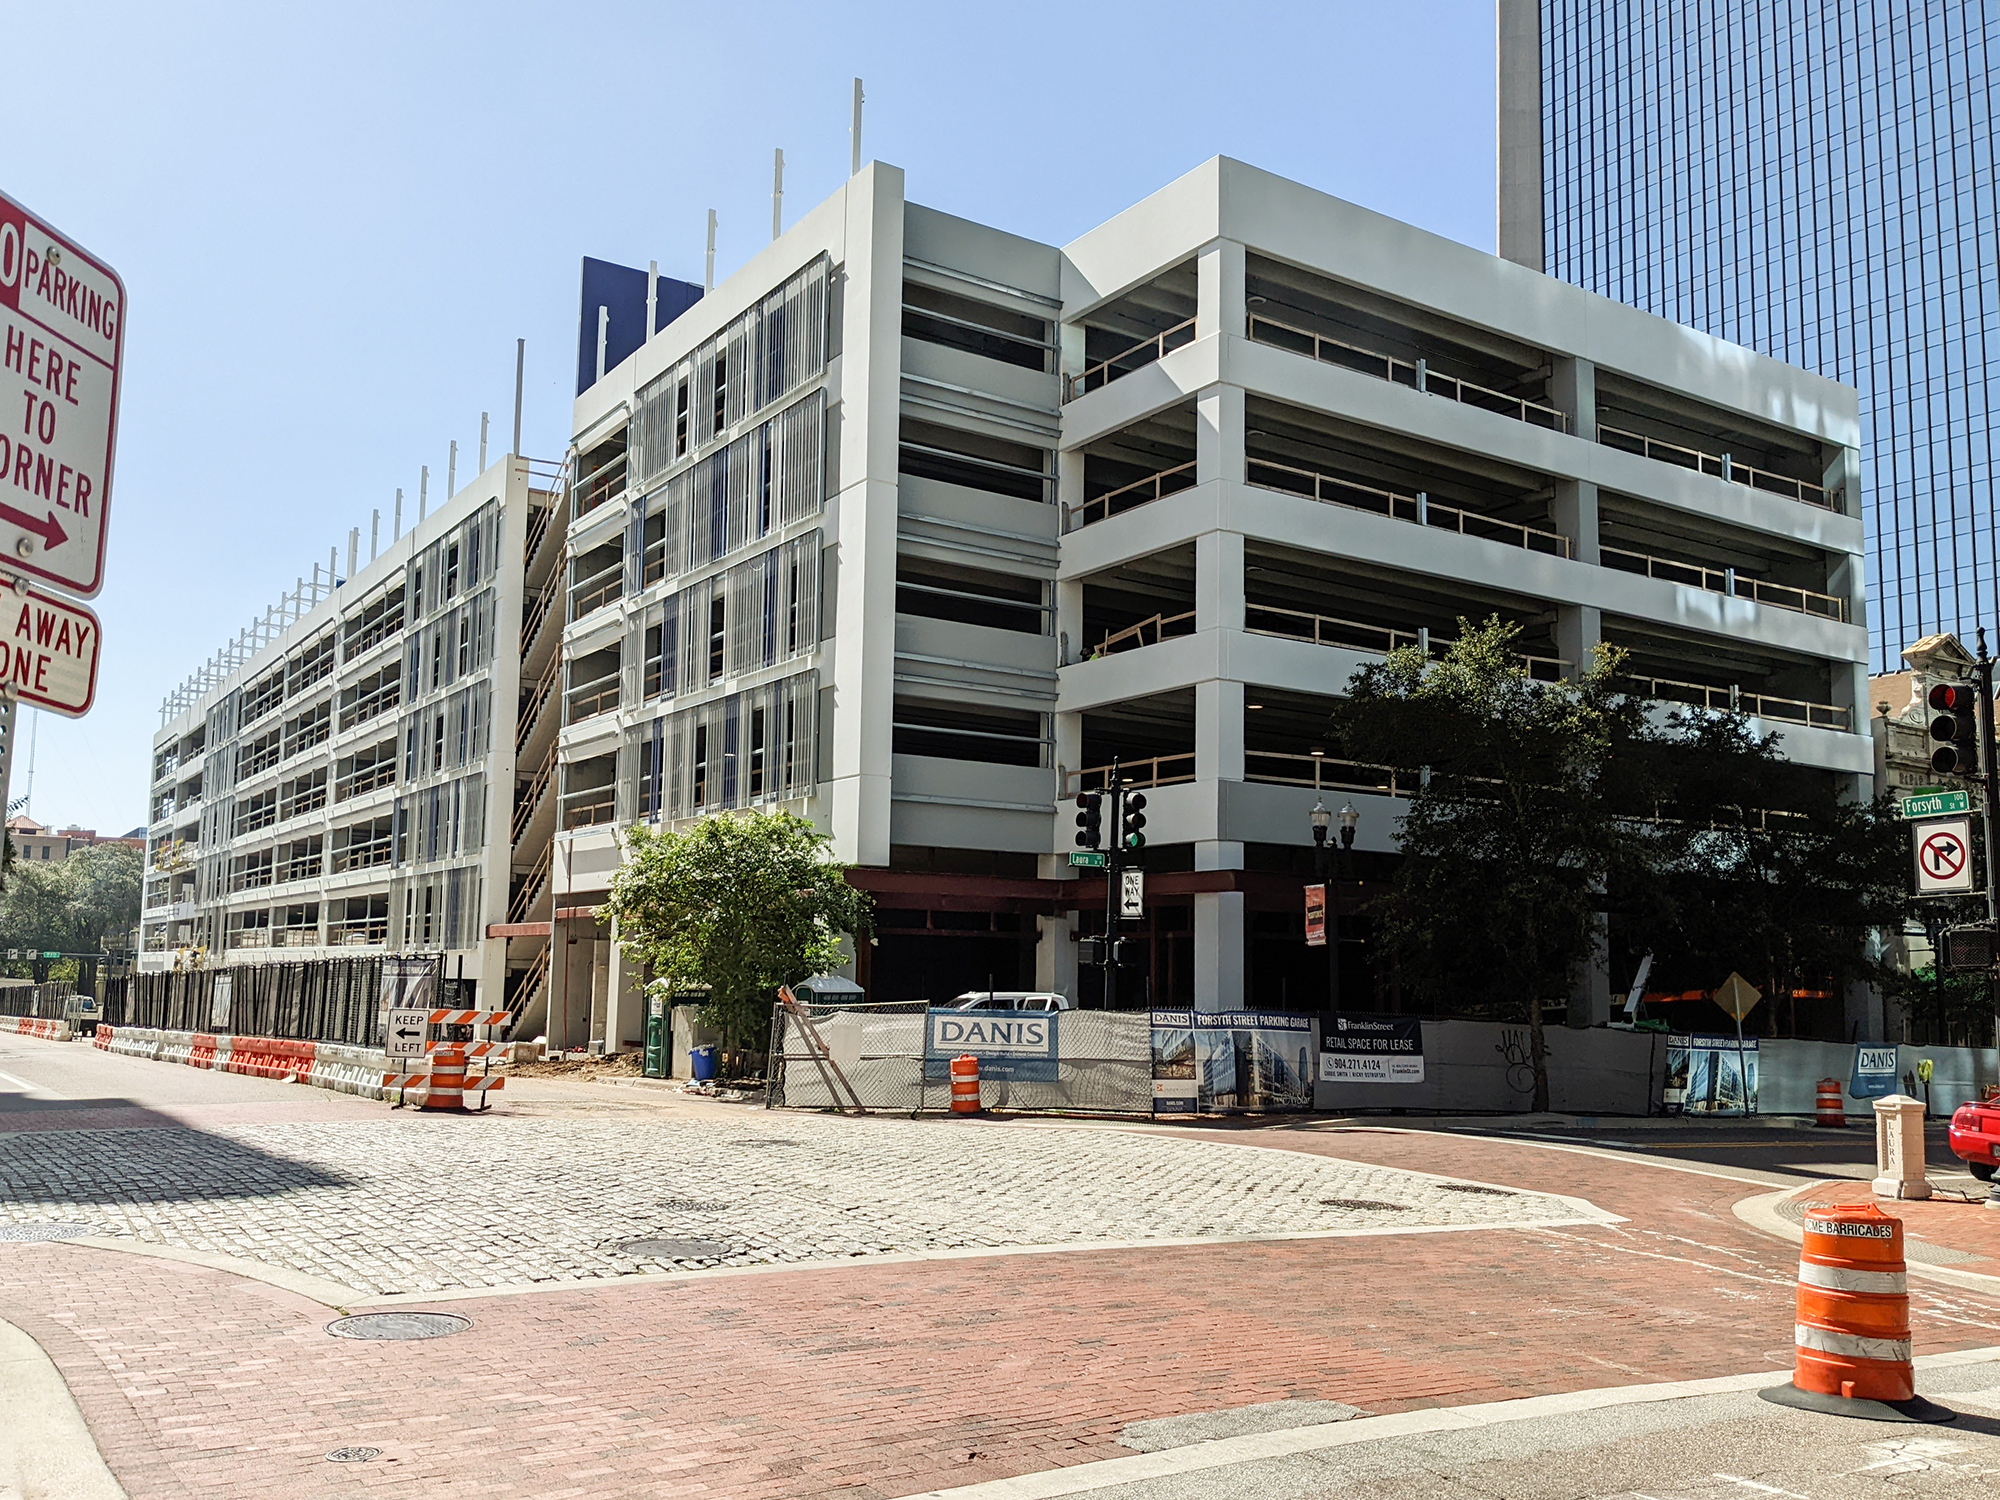 VyStar Credit Union’s new parking garage under construction at Laura and Forsyth streets Downtown.